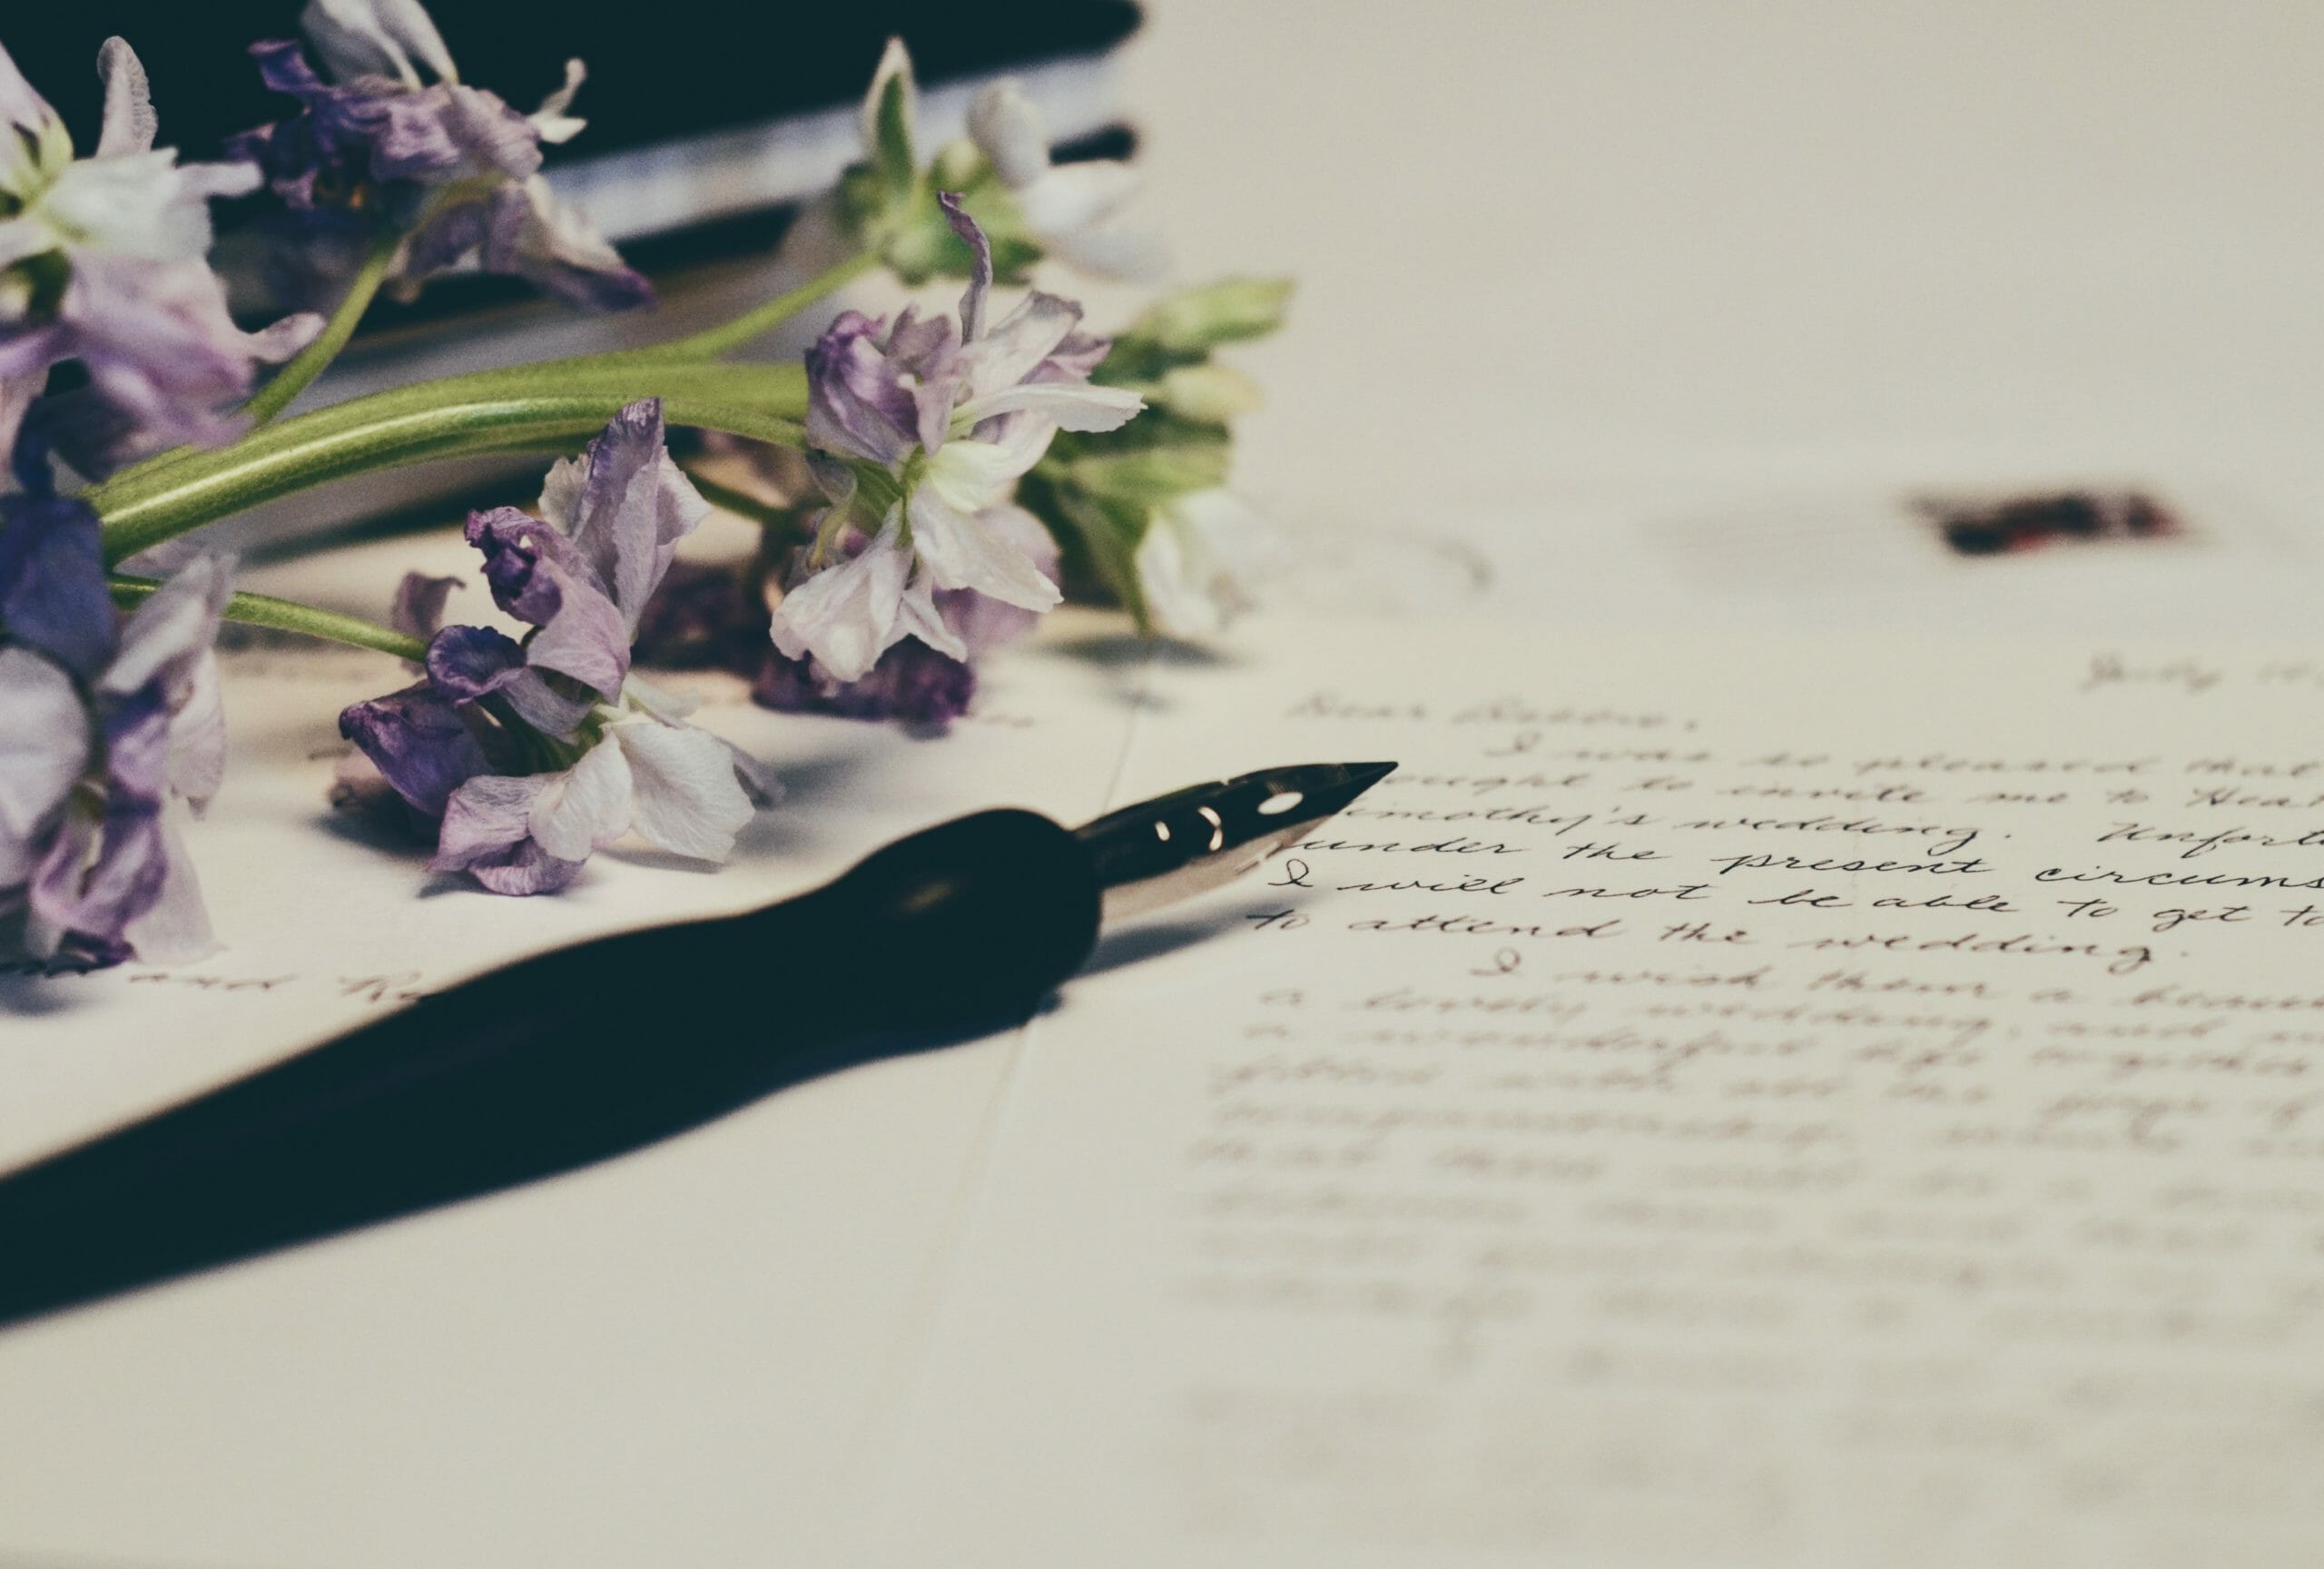 Fountain pen on written text and lilacs - Something Simple First Legal Design Blog